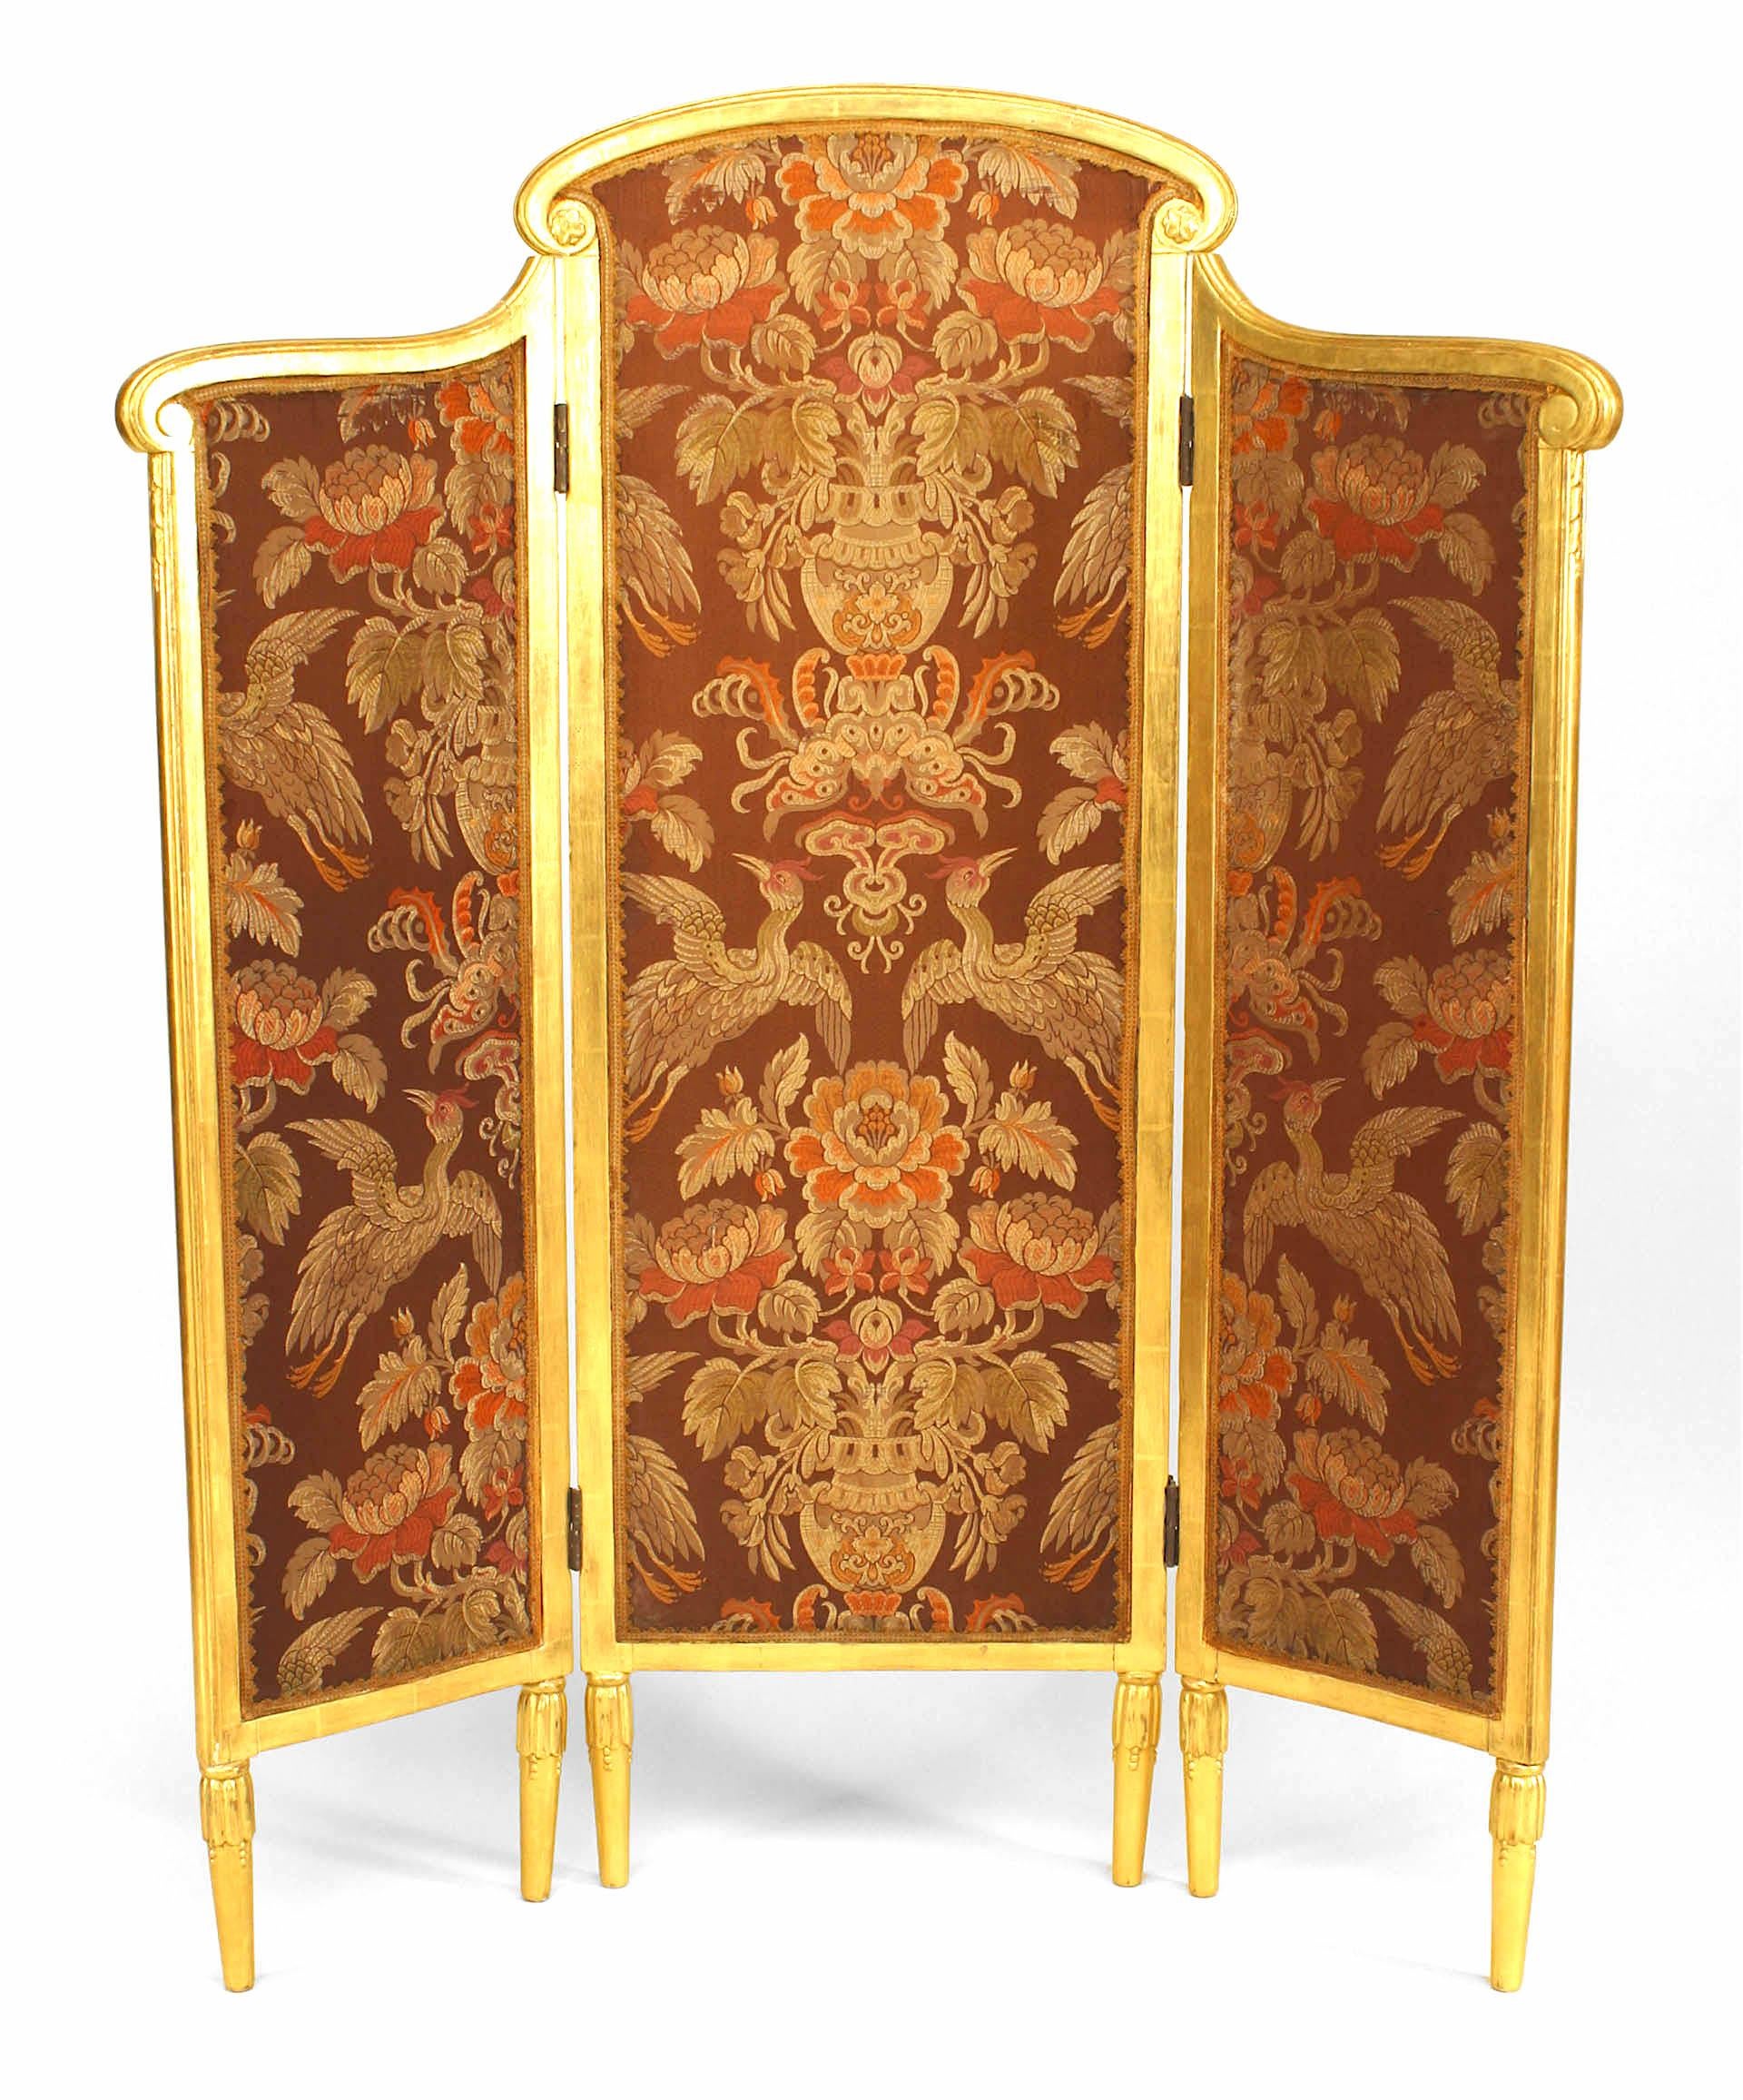 French Art Deco low 3 fold gilt screen with arch form center and upholstered panels in maroon with floral & bird design (attributed to SUE & MARE)
